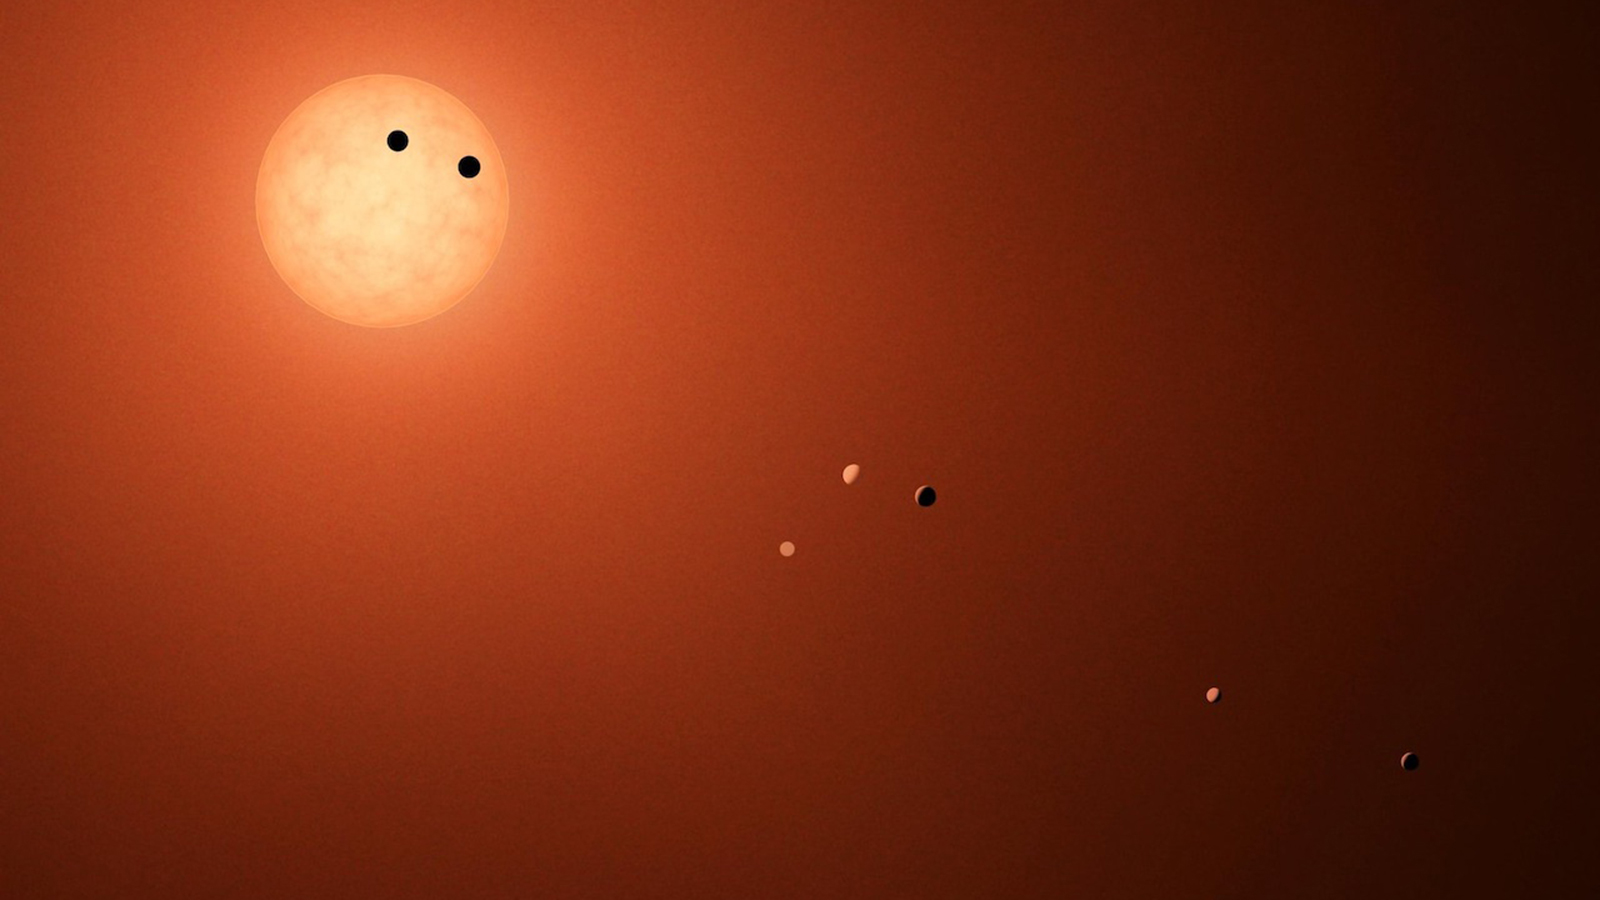 Artist's concept shows the red-dwarf star, TRAPPIST-1, at the upper left, with two large dots on the face of the disk representing transiting planets; five more planets are shown at varying positions descending toward the lower right as they orbit the star. Artist's concept shows the TRAPPIST-1 planets as they might be seen from Earth using an extremely powerful - and fictional - telescope. Credit: NASA/JPL-Caltech